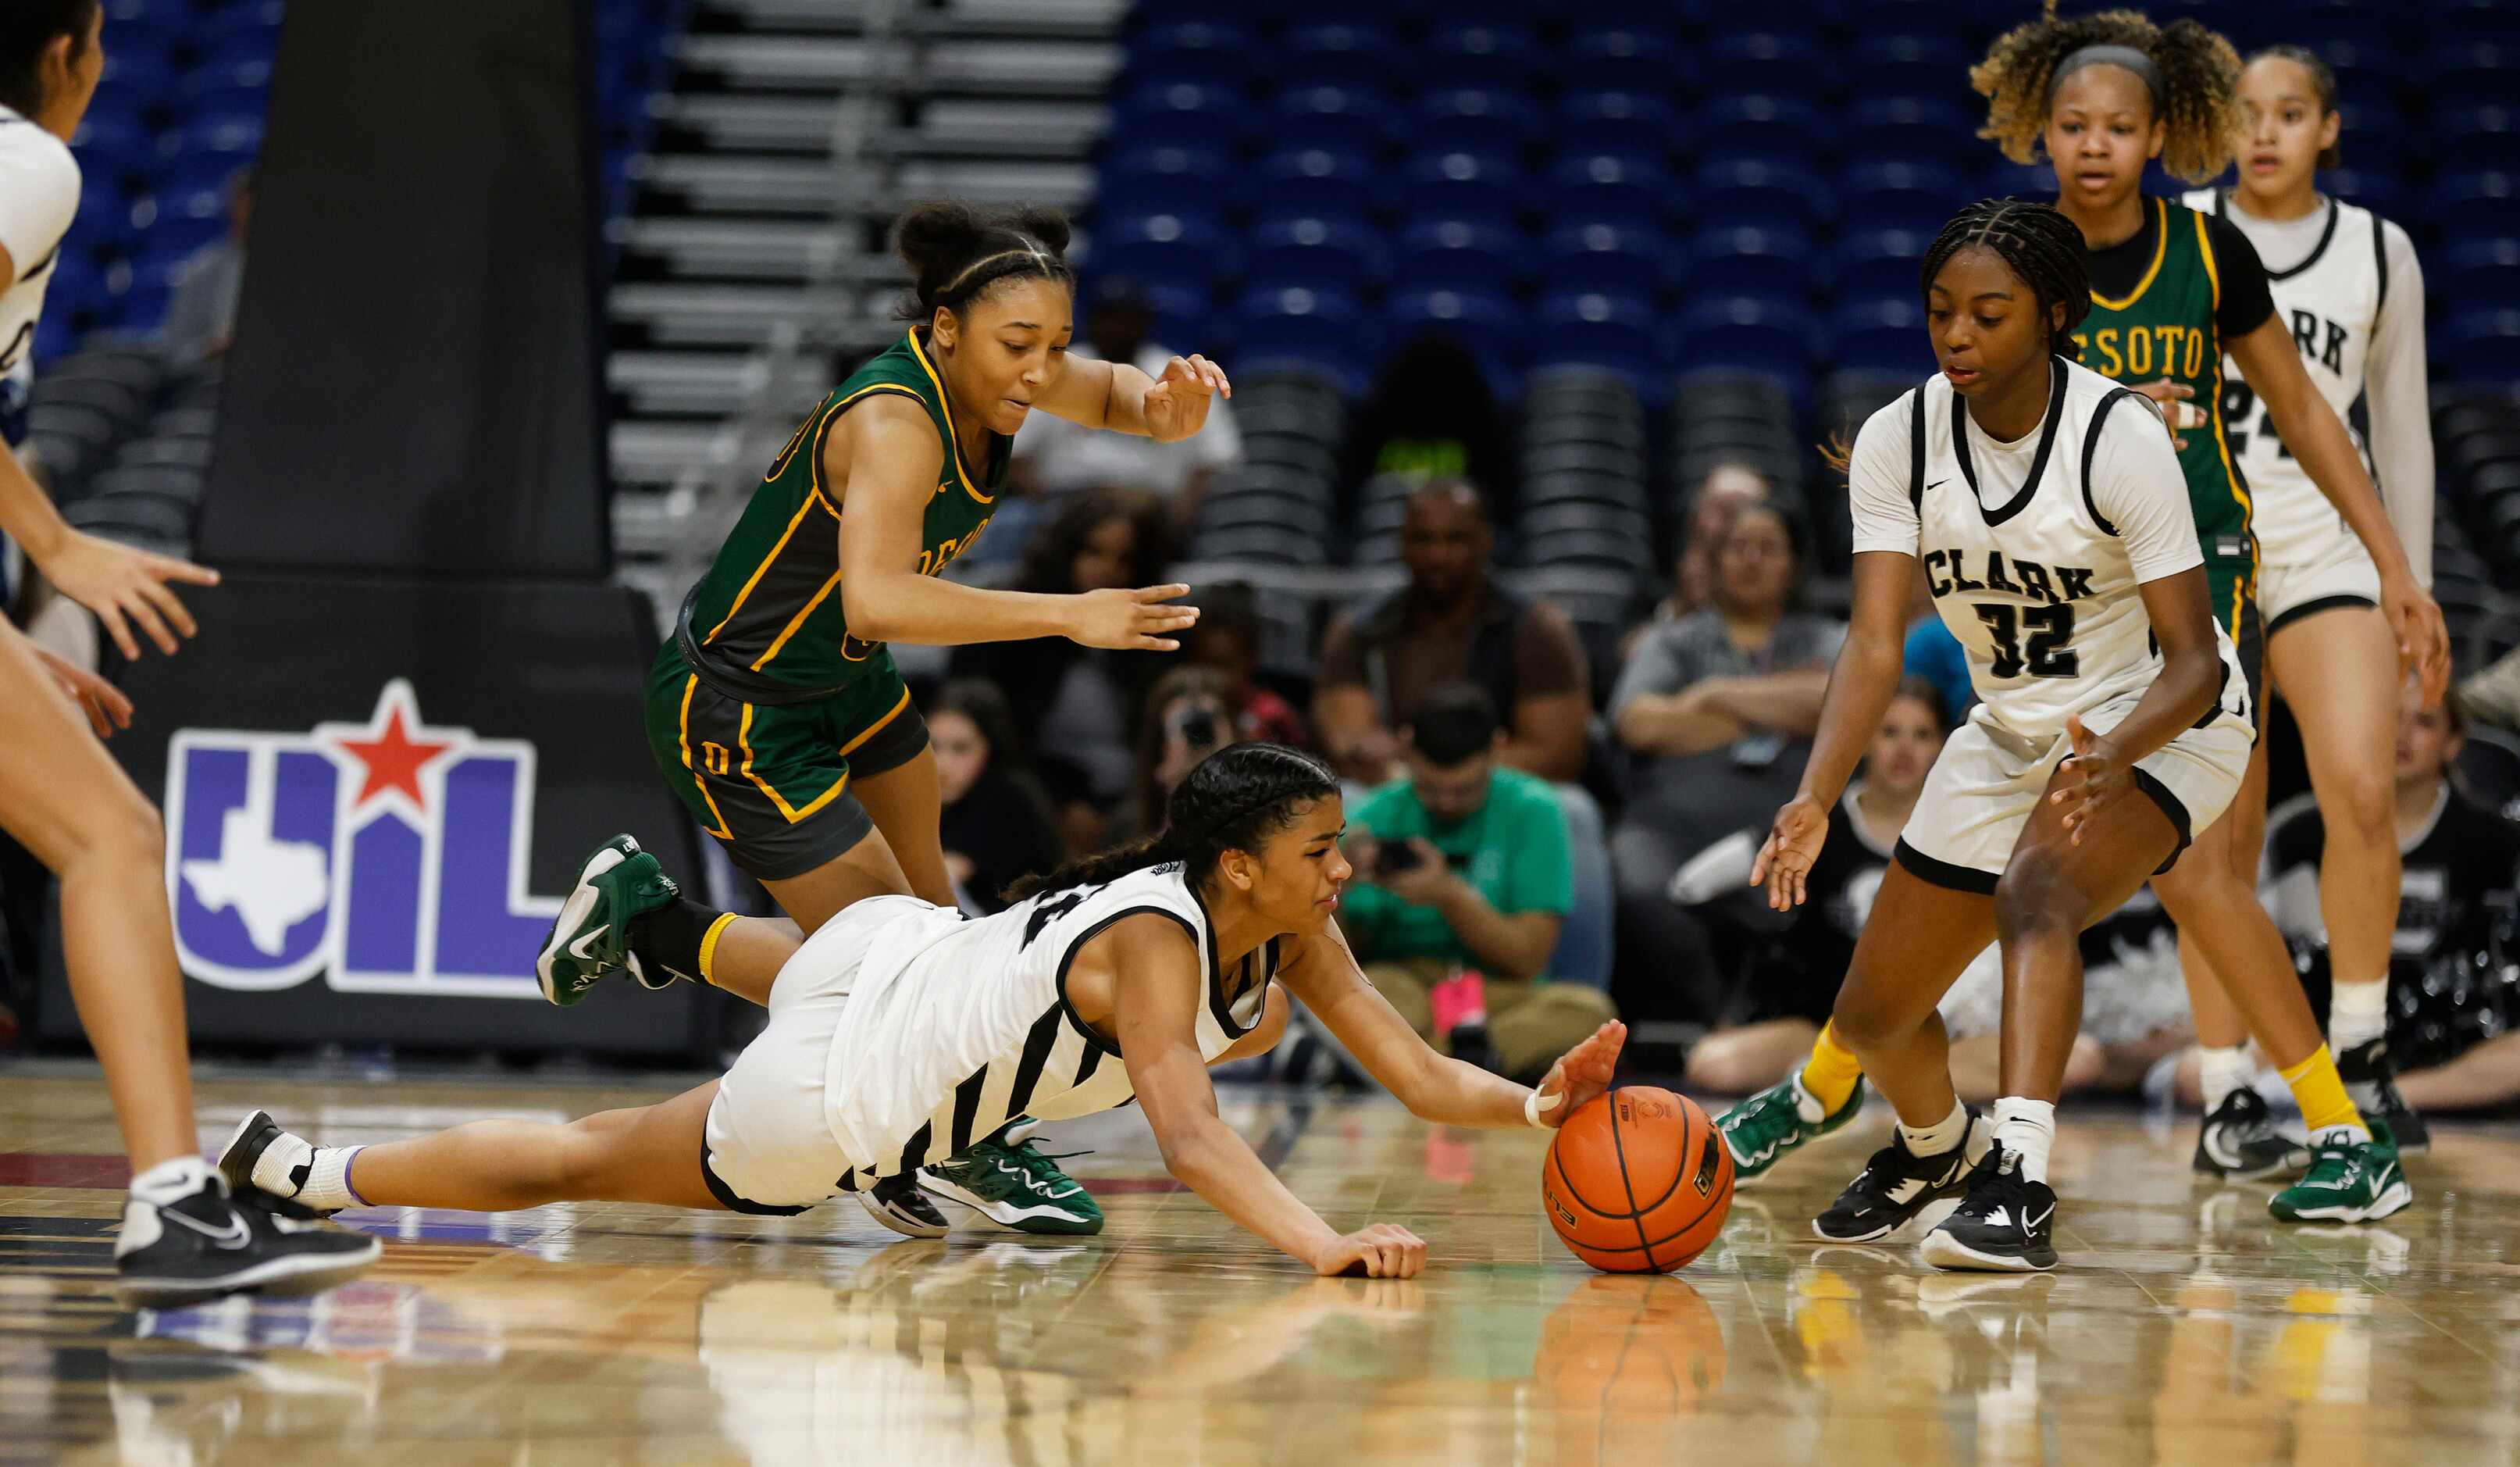 Clark Cougars’ Adrianna Roberson (12) dives for a loose ball in front of Desoto Mylasia...